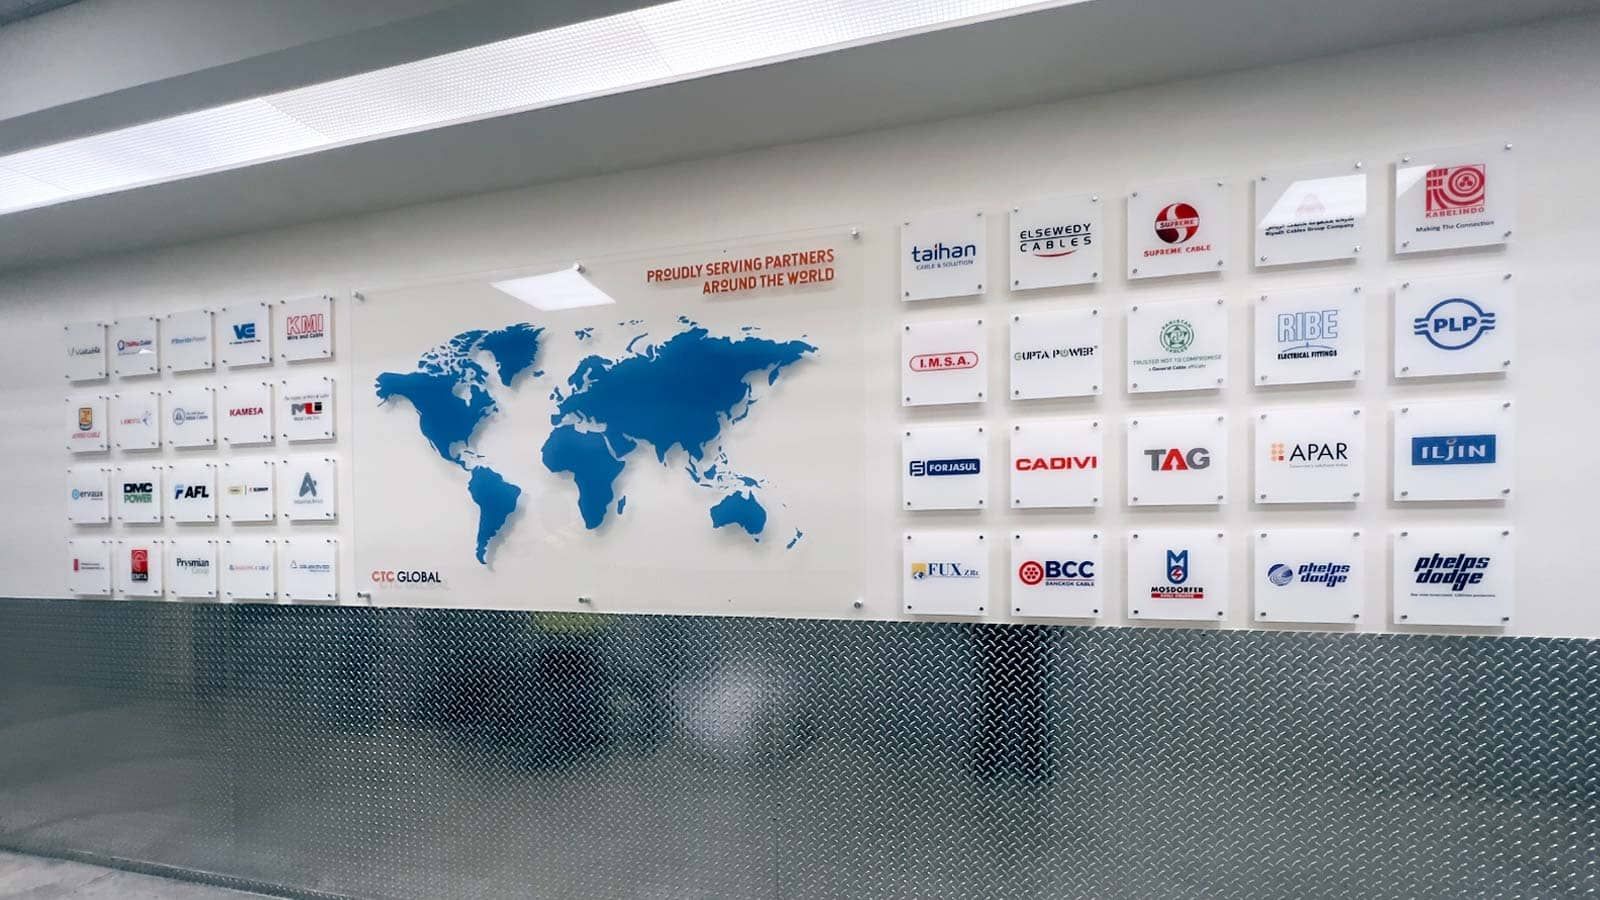 CTC Global office sign decorating the interior wall